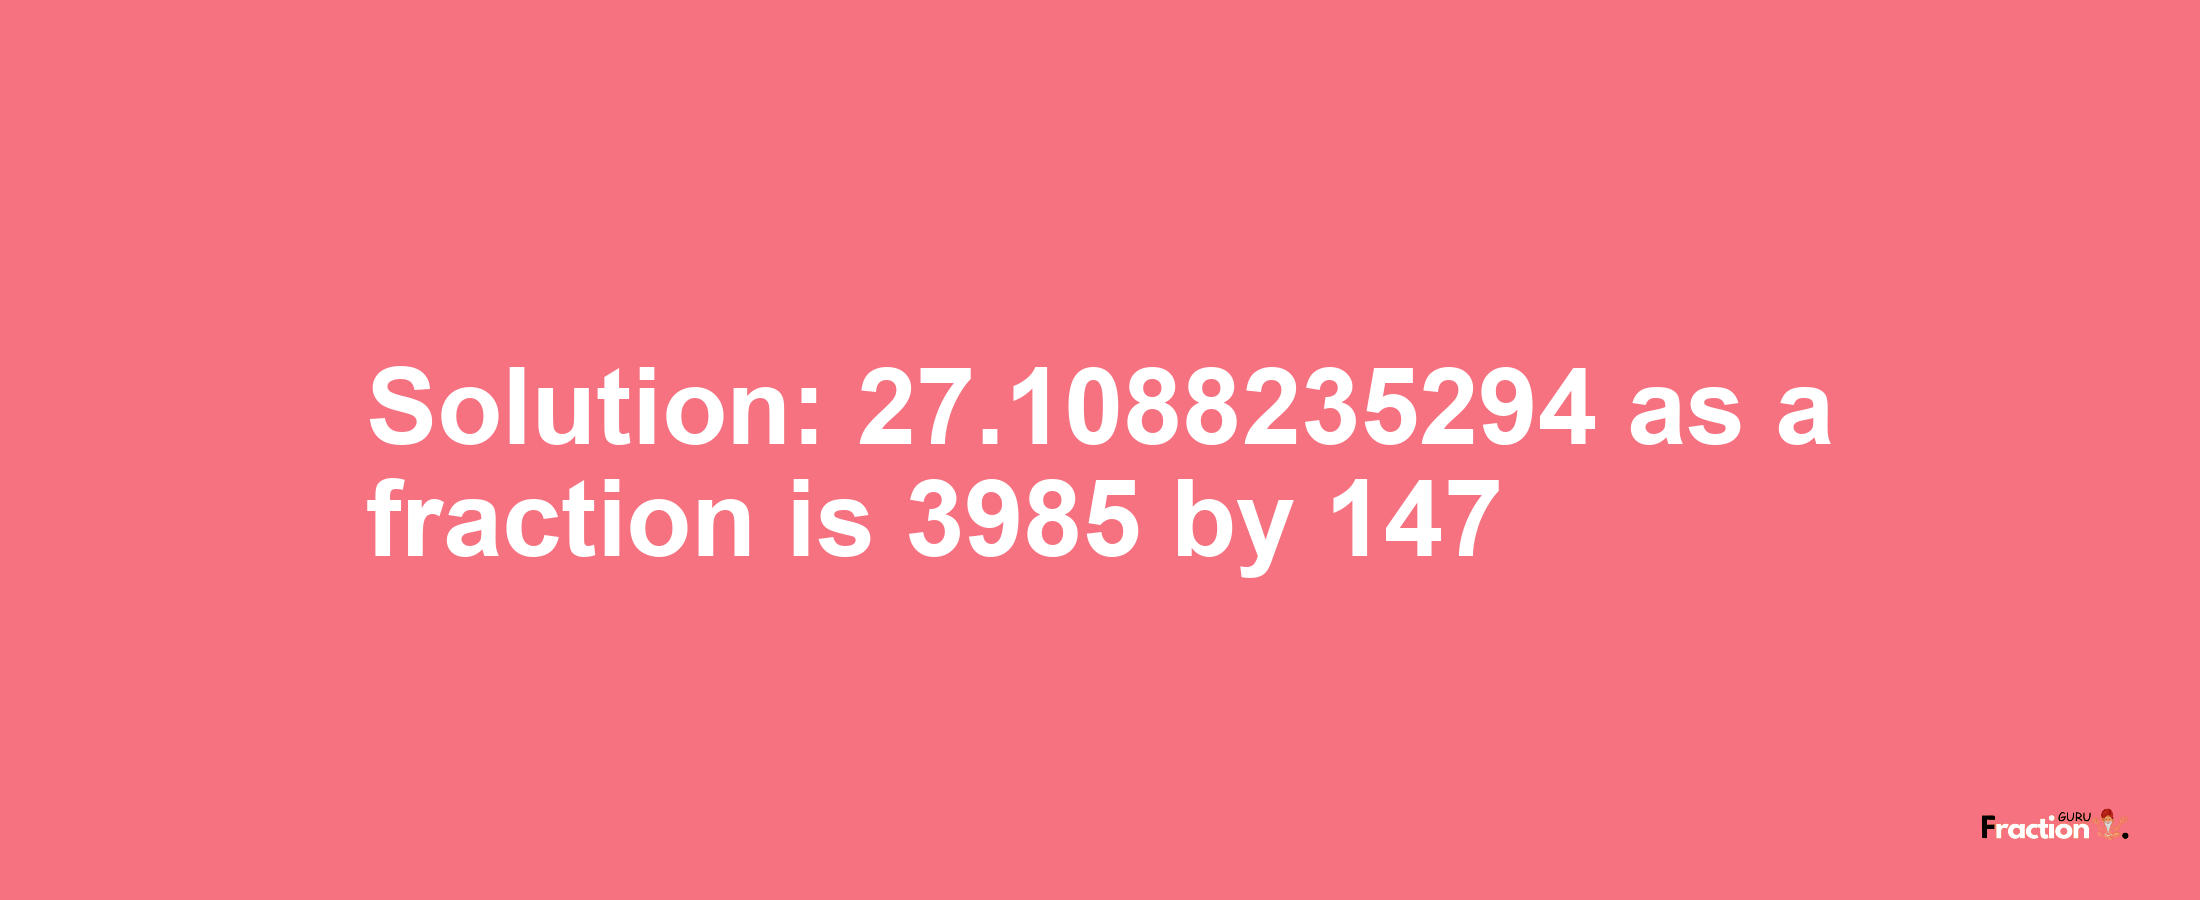 Solution:27.1088235294 as a fraction is 3985/147